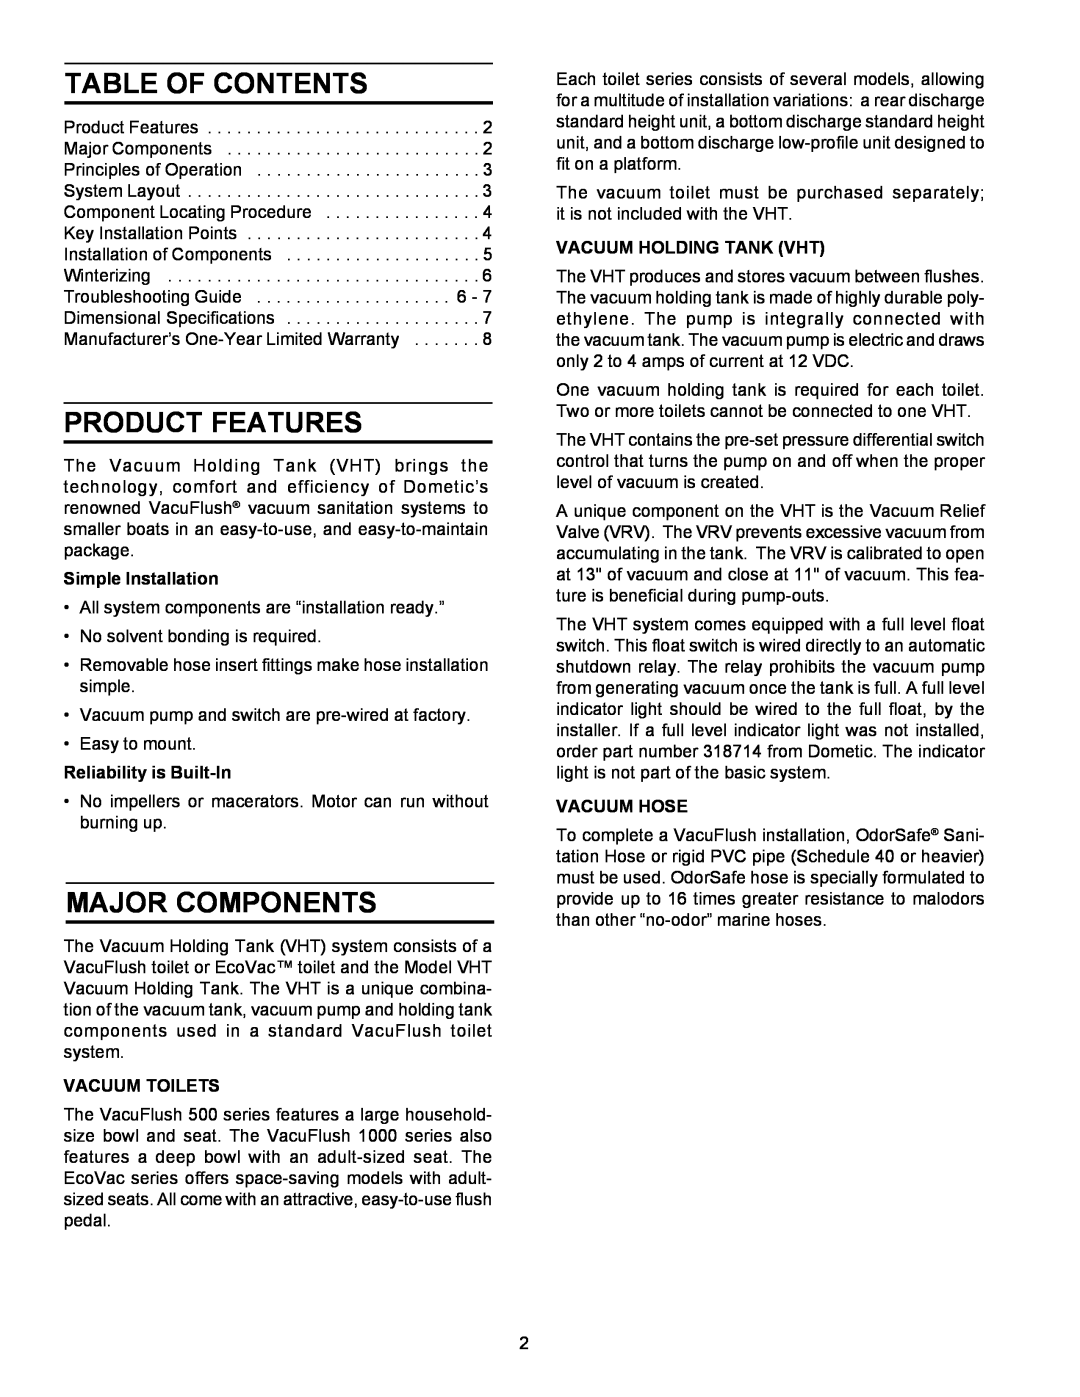 SeaLand VACUUM HOLDING TANK Table Of Contents, Product Features, Major Components, Simple Installation, Vacuum Toilets 